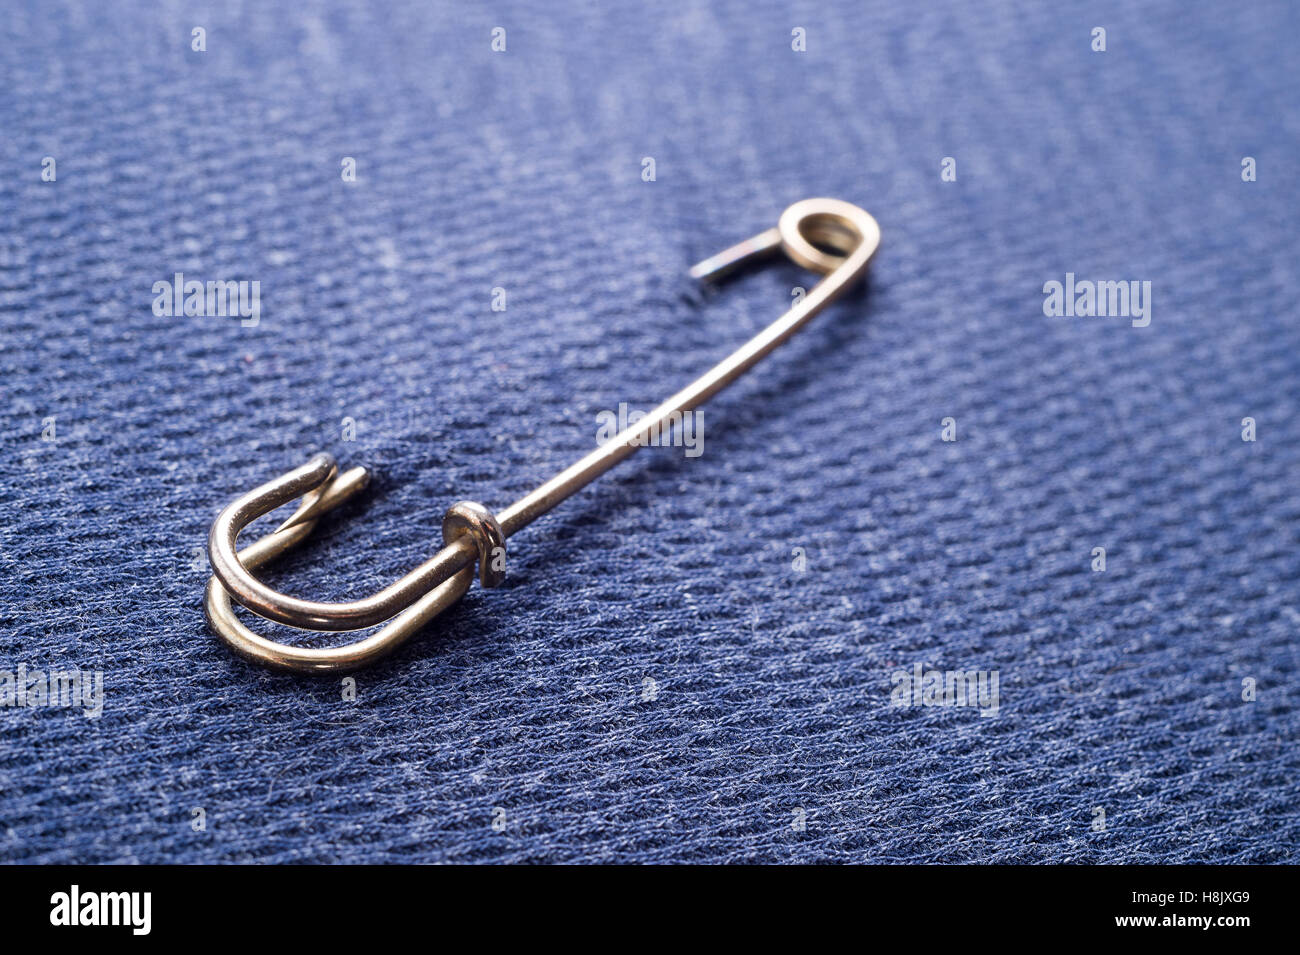 Safety pin on clothes as a symbol of solidarity Stock Photo